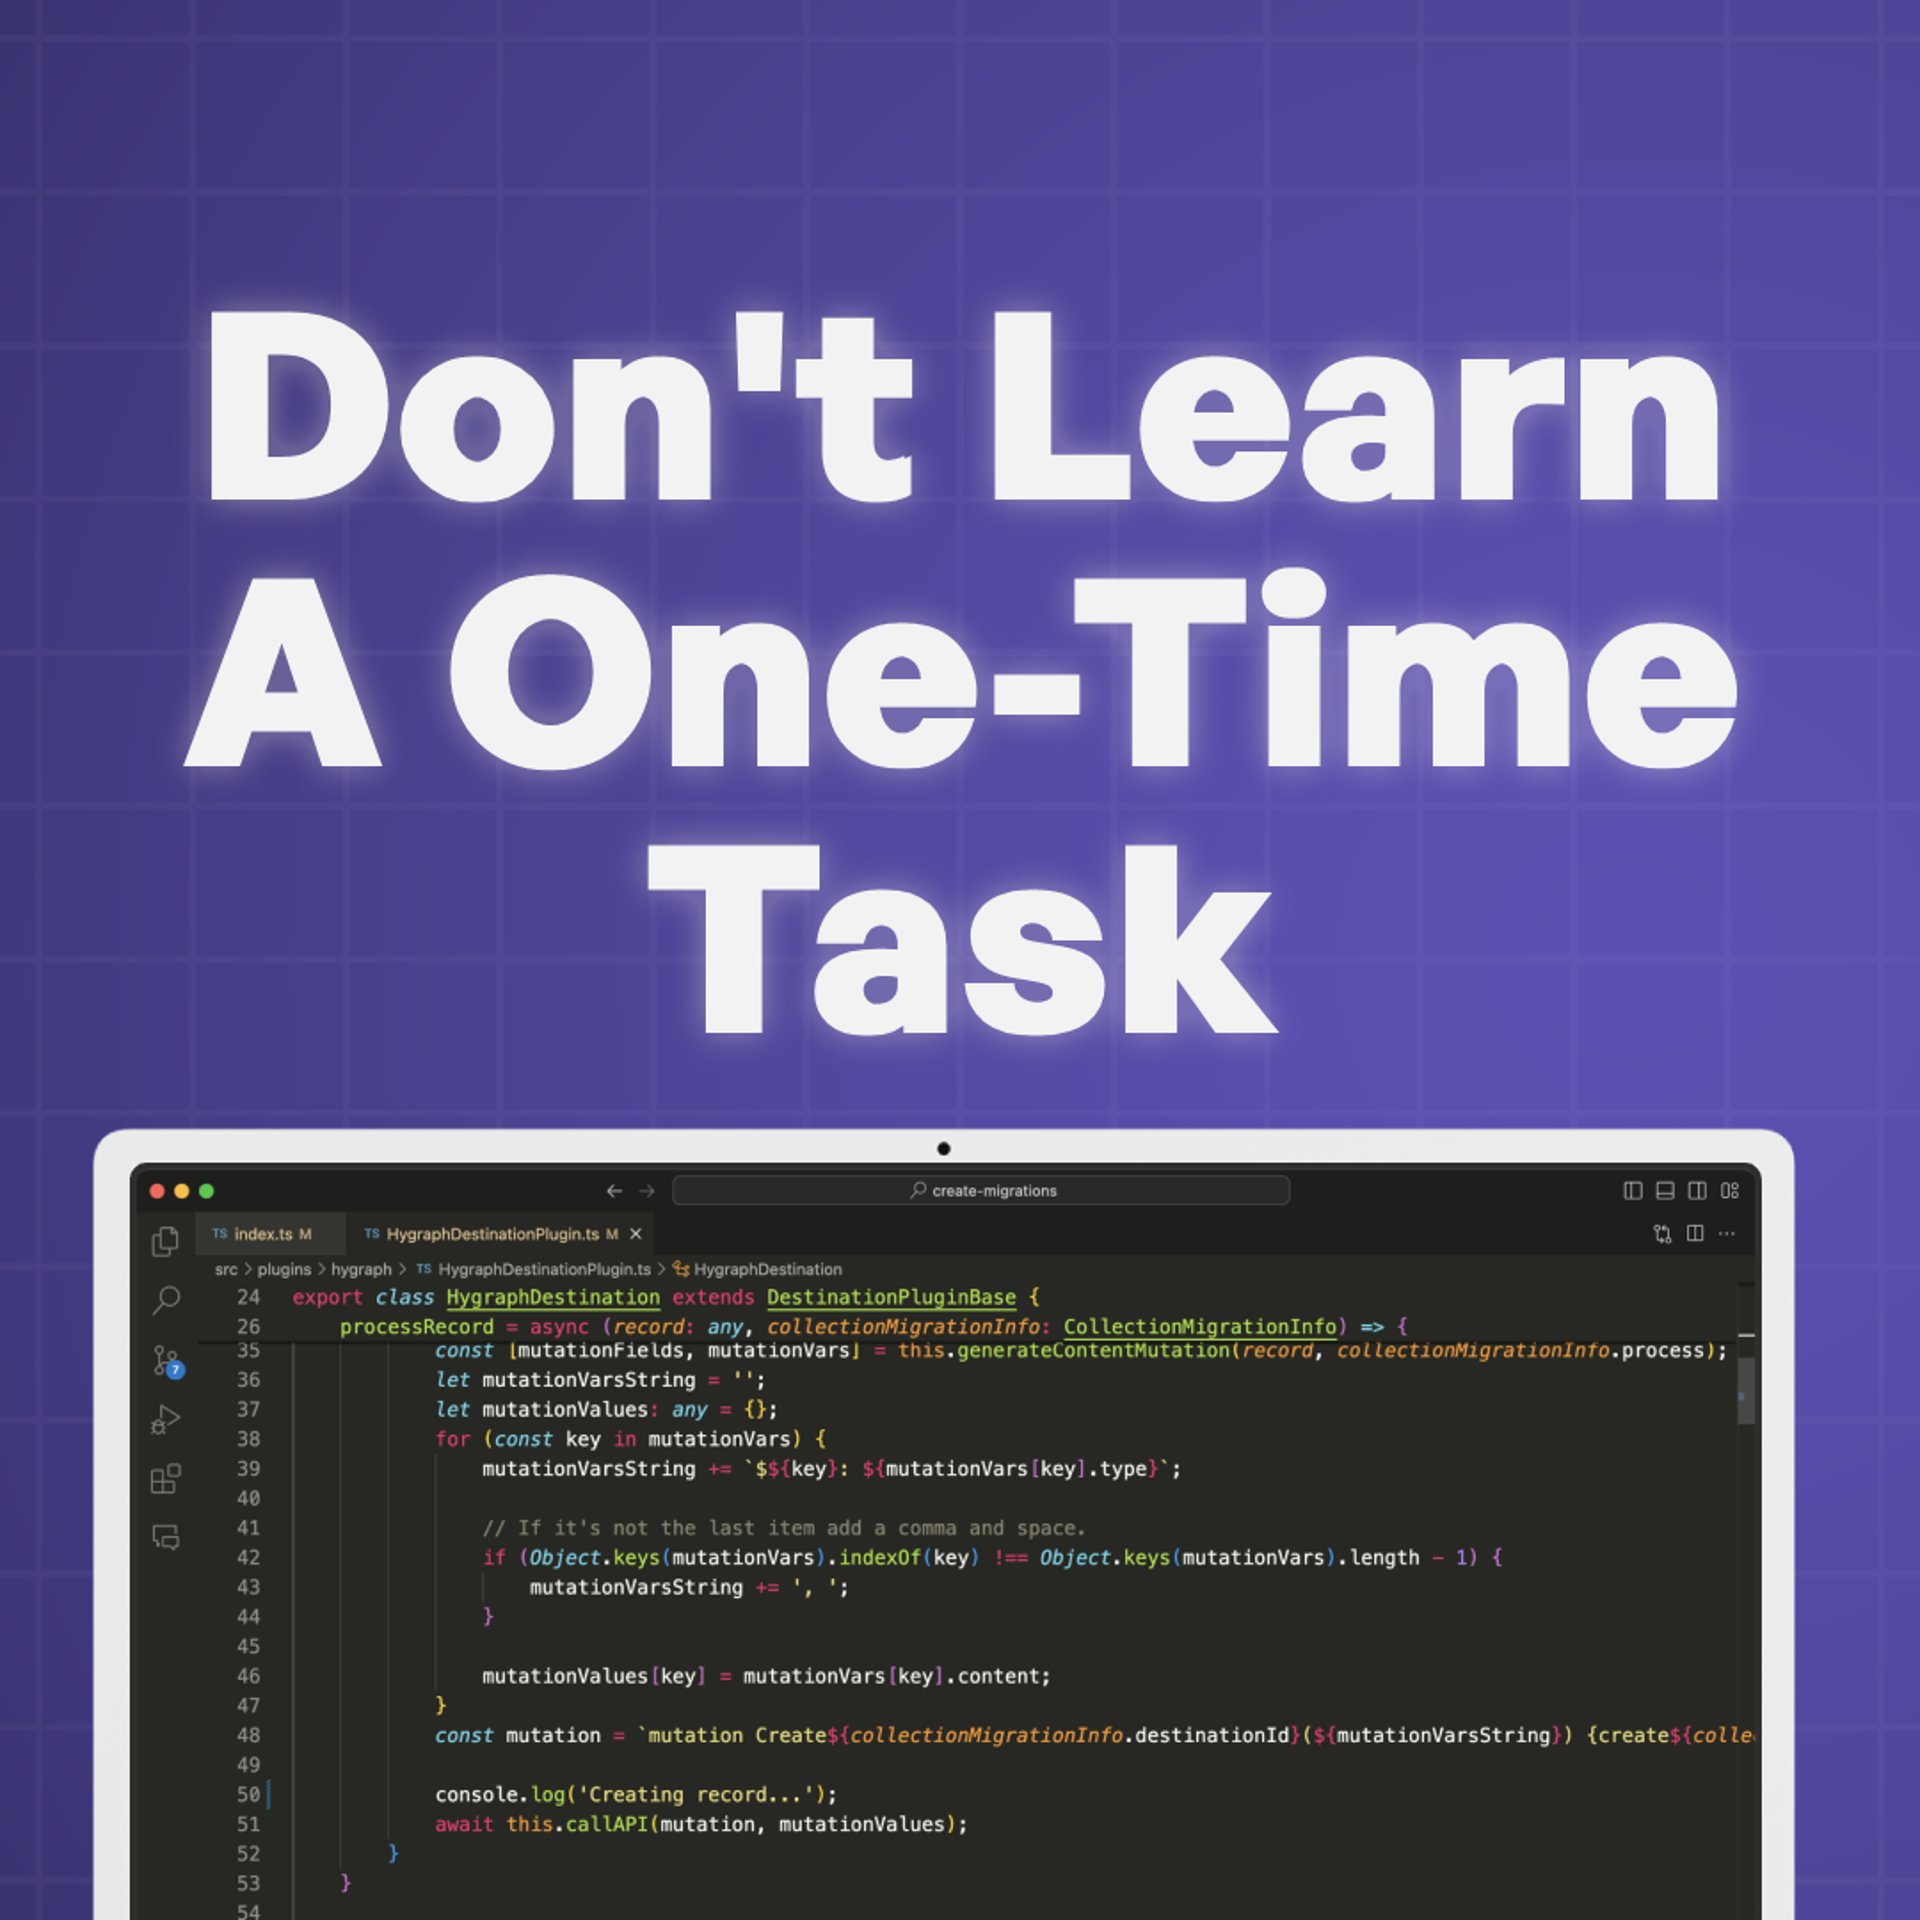 "Don't learn a one-time task" with a screenshot of code